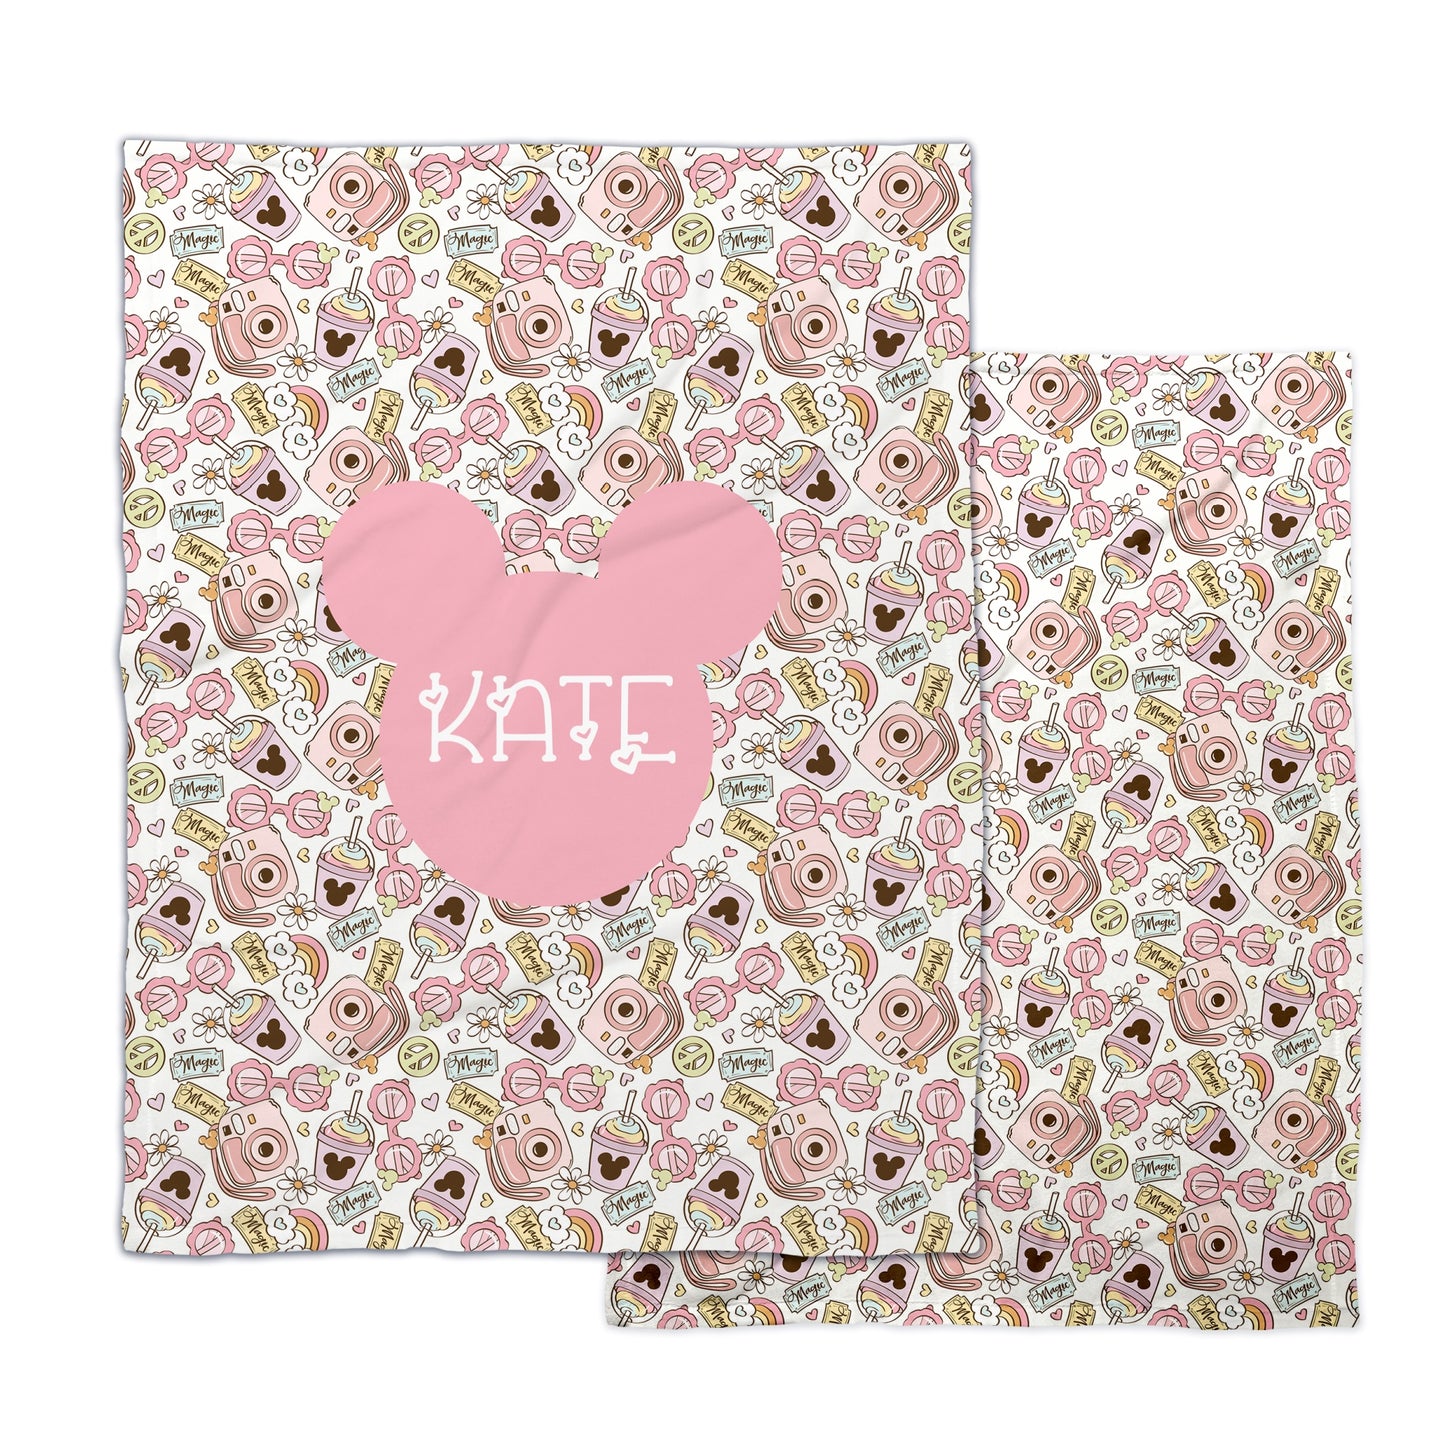 Spring mouse ear patterned minky blanket with customizable text area.